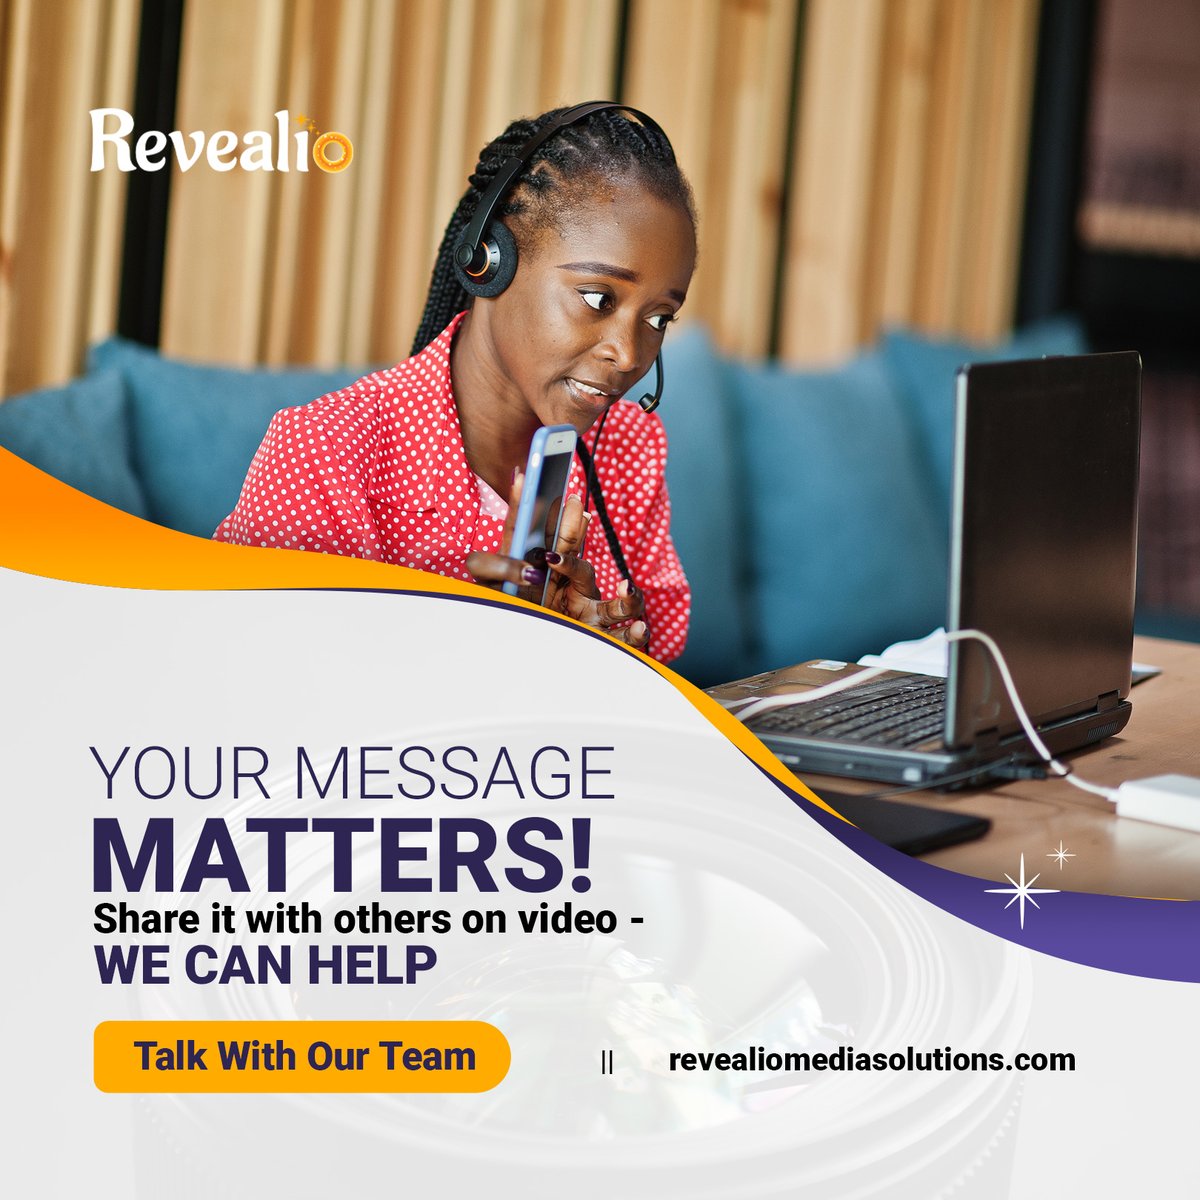 REVEALiO will get your message told in a way that compels others to connect with you. Contact us.

#video #story #videostorytelling #videomarketing #shortformvideo #leadgeneration #compelling #relatability #smallbusinessvideo #nonprofitvideo #innovativestorytelling #revealio